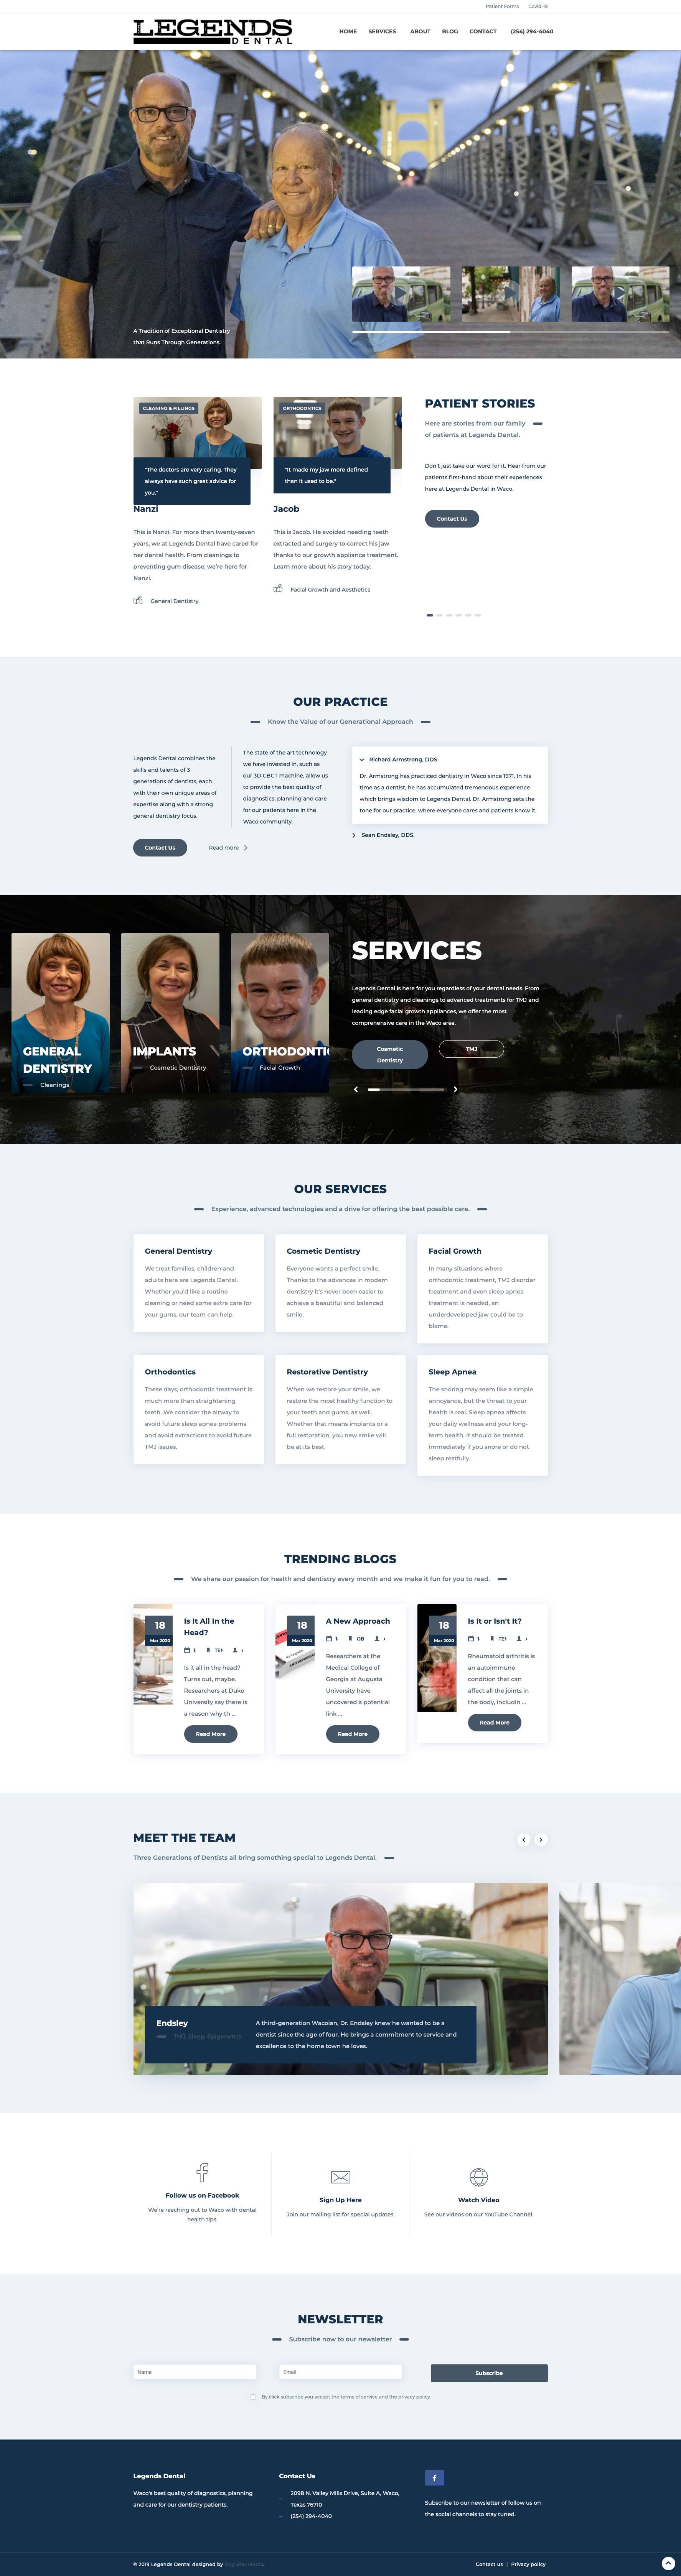 A website design for a construction company specializing in Legends Dental Waco.